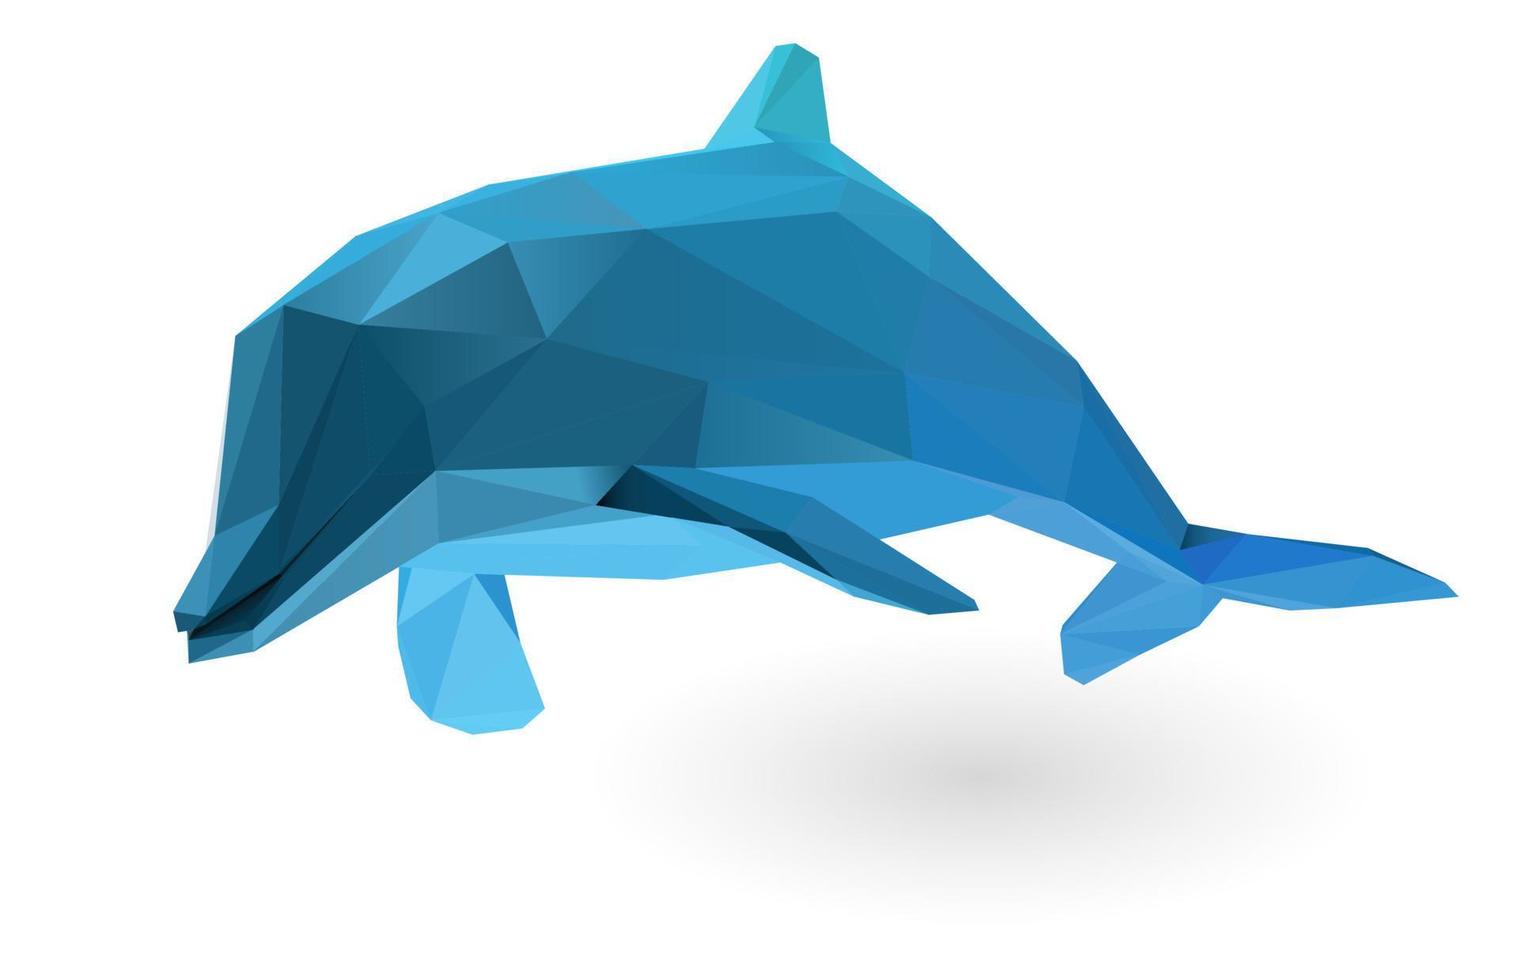 Vector low poly jumping low poly dolphin illustration. Geometric polygonal aquatic animal design